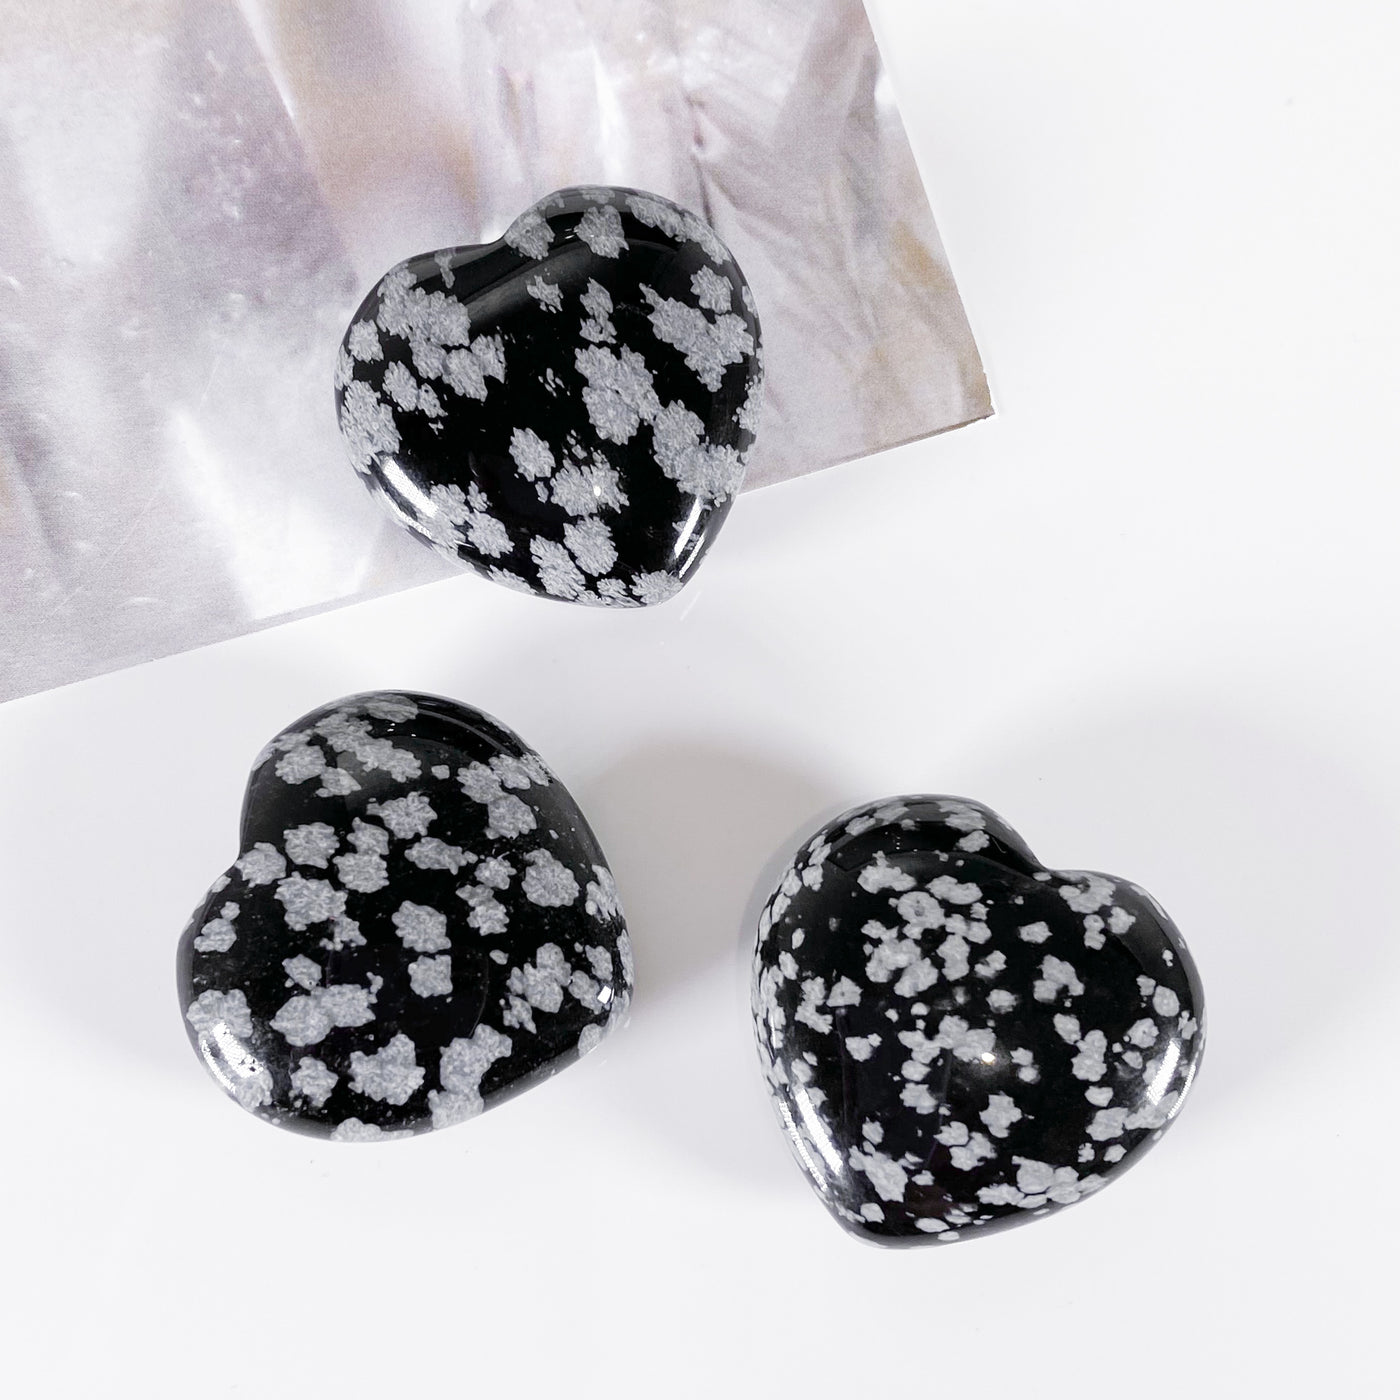 Tumbled Snowflake Obsidian Heart for Purification